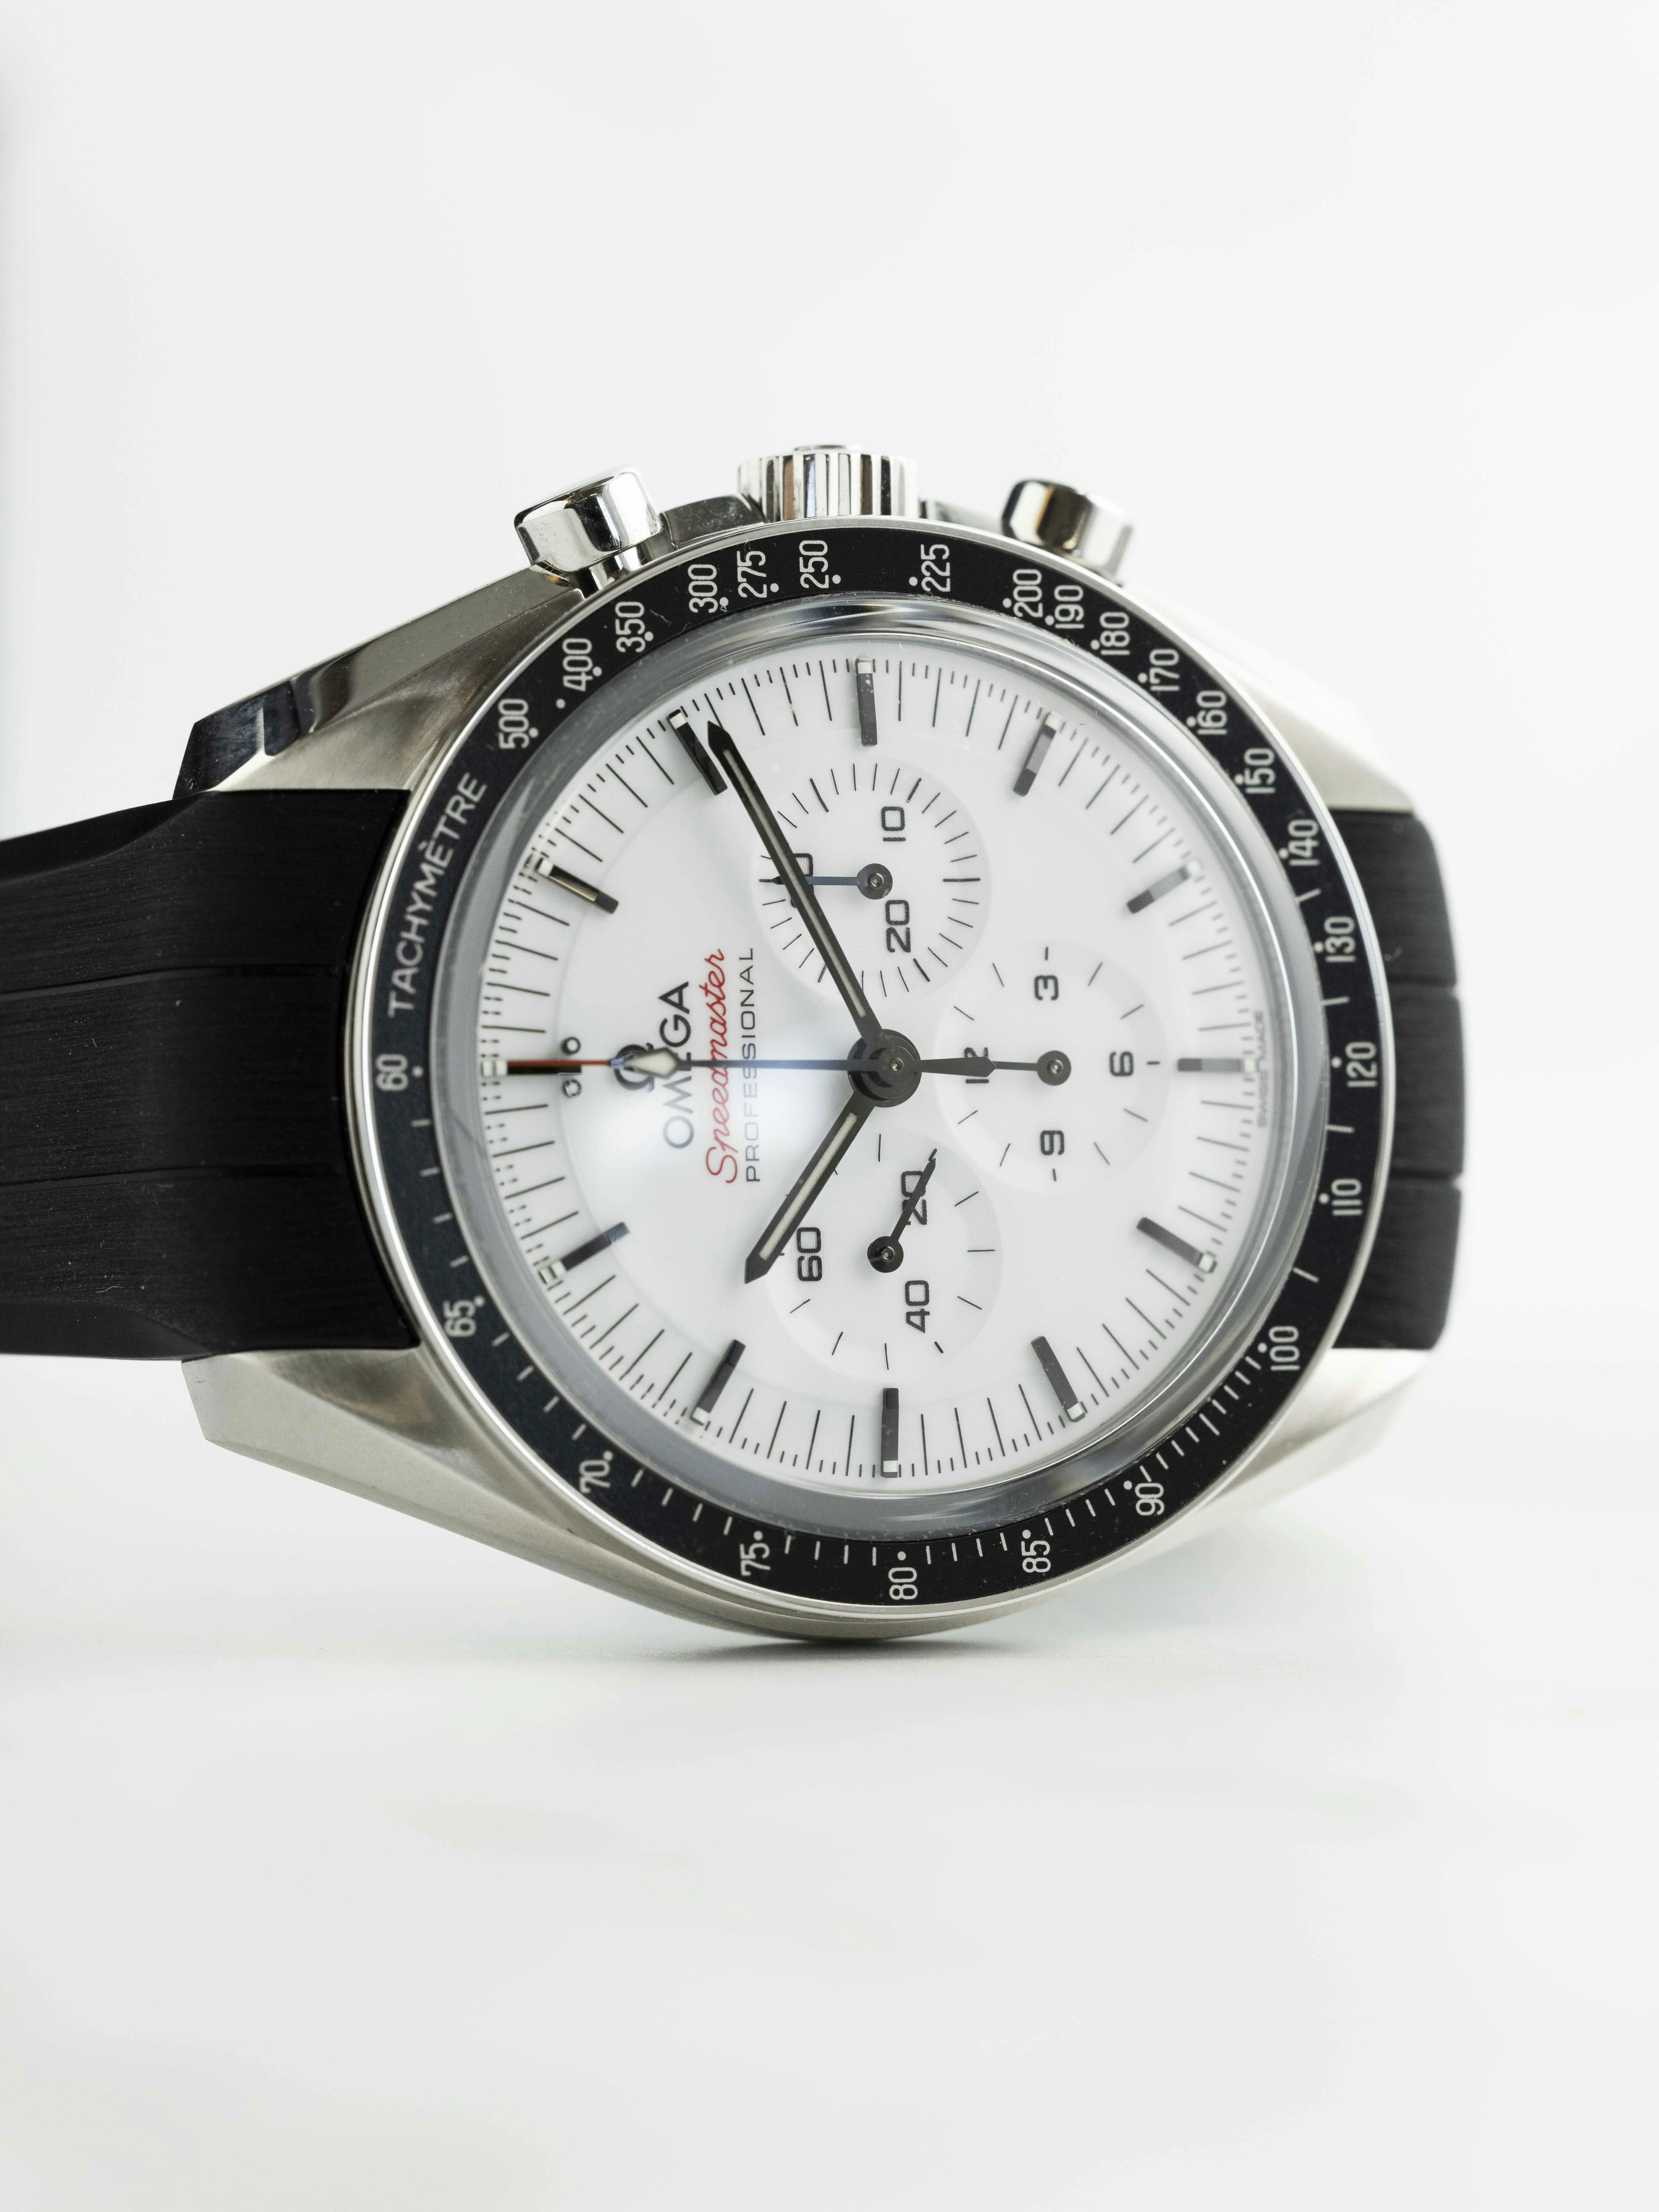 Omega Speedmaster Professional Moonwatch 310.32.42.50.04.001 42mm Stainless steel White 9